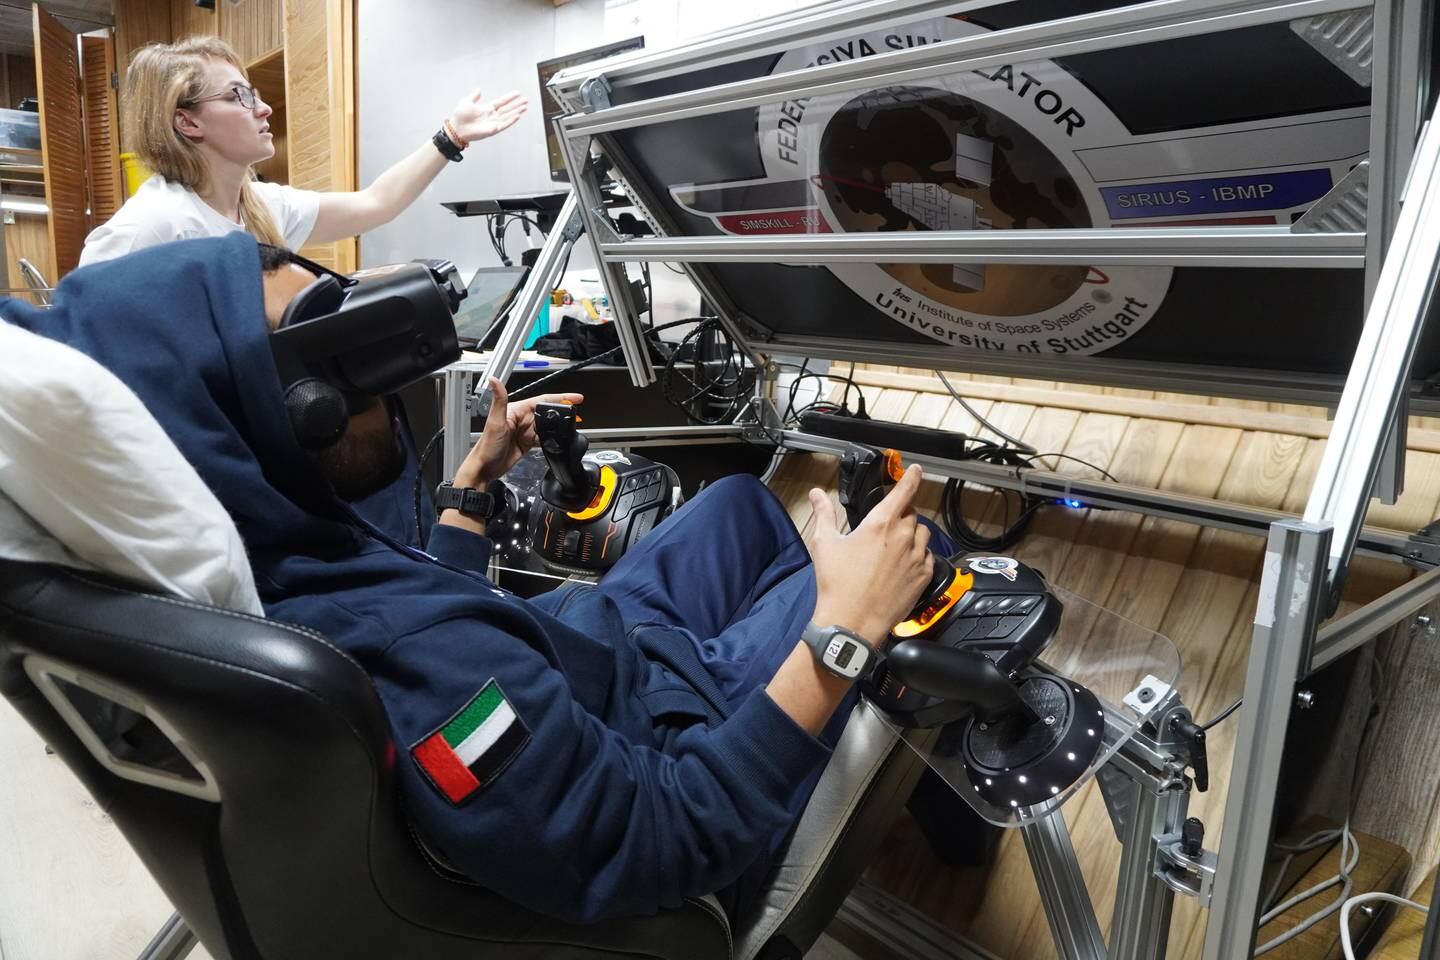 Saleh Al Ameri uses a virtual reality headset to 'fly a spaceship to the Moon'. Photo: MBRSC